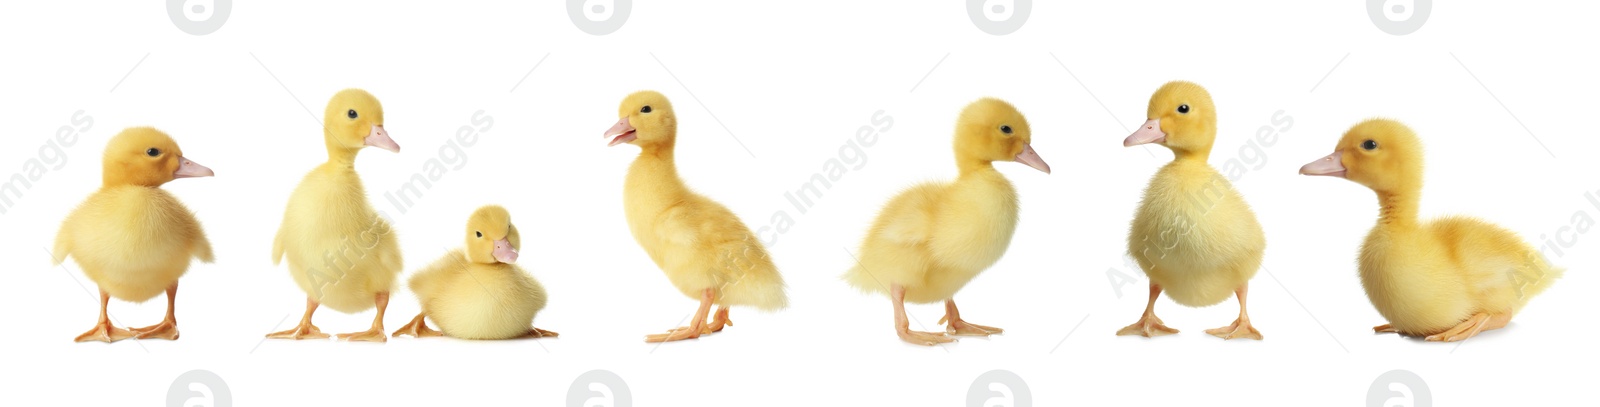 Image of Collage with cute fluffy ducklings on white background, banner design. Farm animals